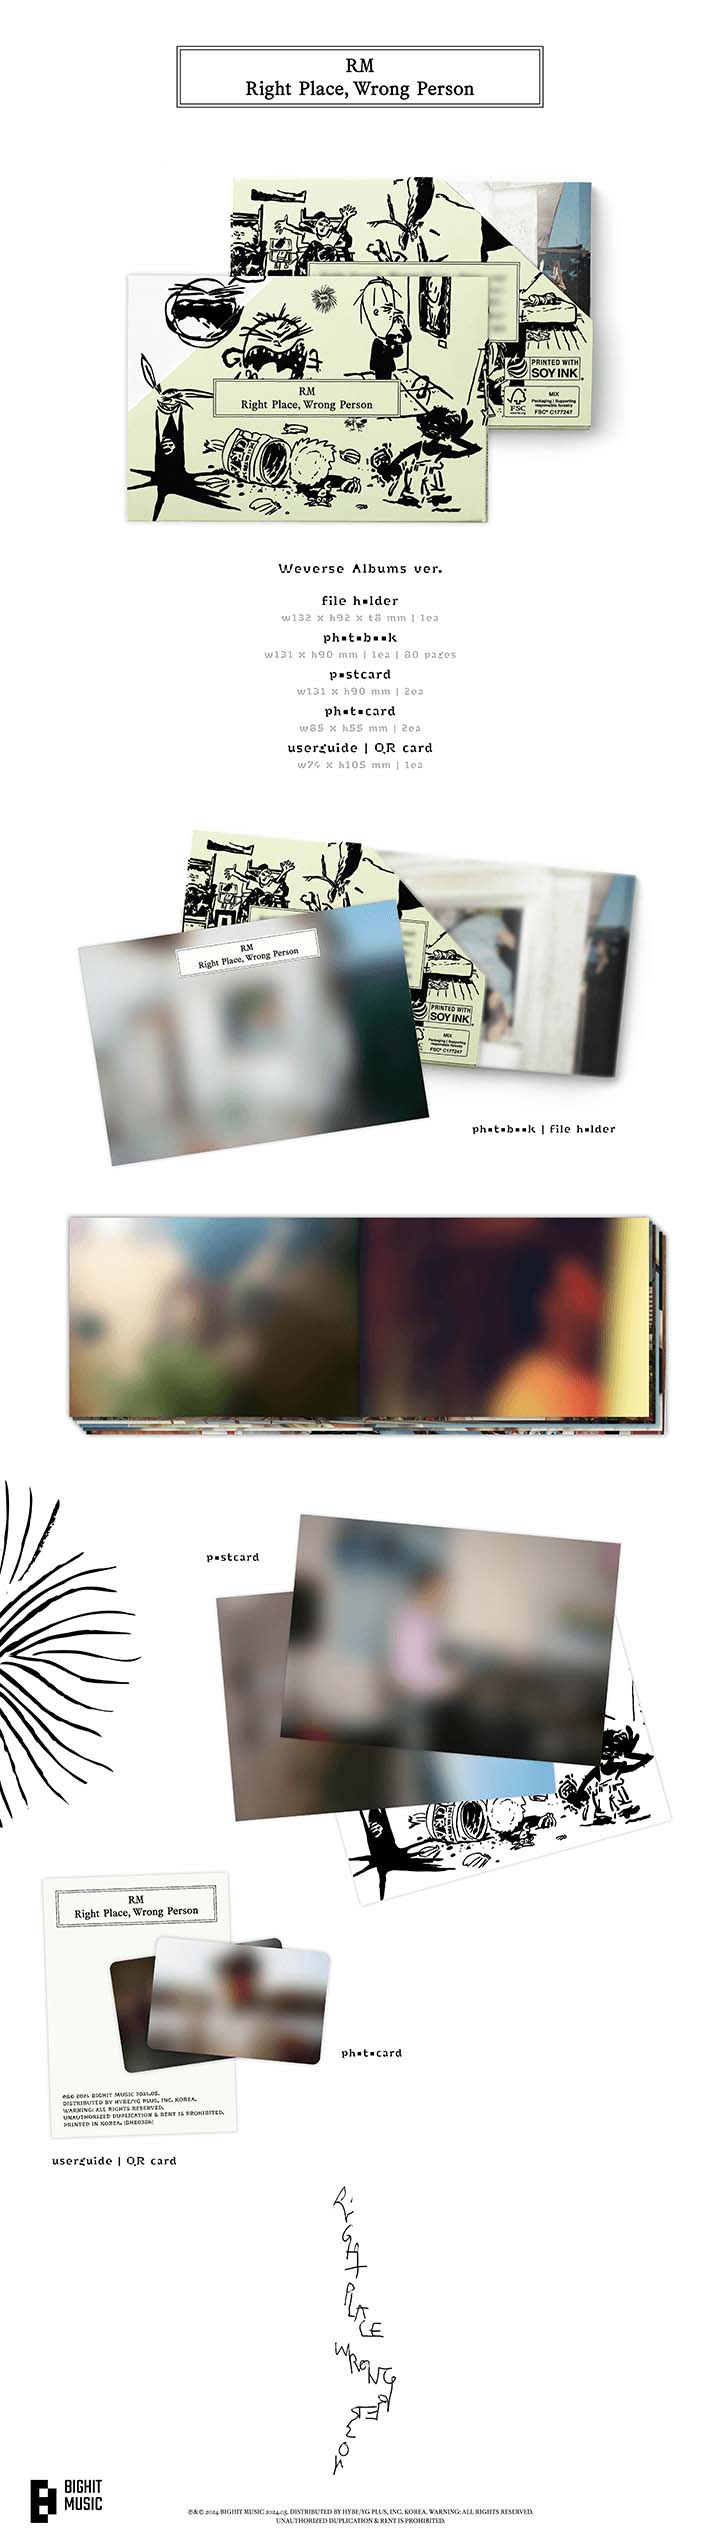 [PRE-ORDER ONLY] [WEVERSE] RM(BTS) 'RIGHT PLACE, WRONG PERSON' (WERVERSE ALBUMS VER.)